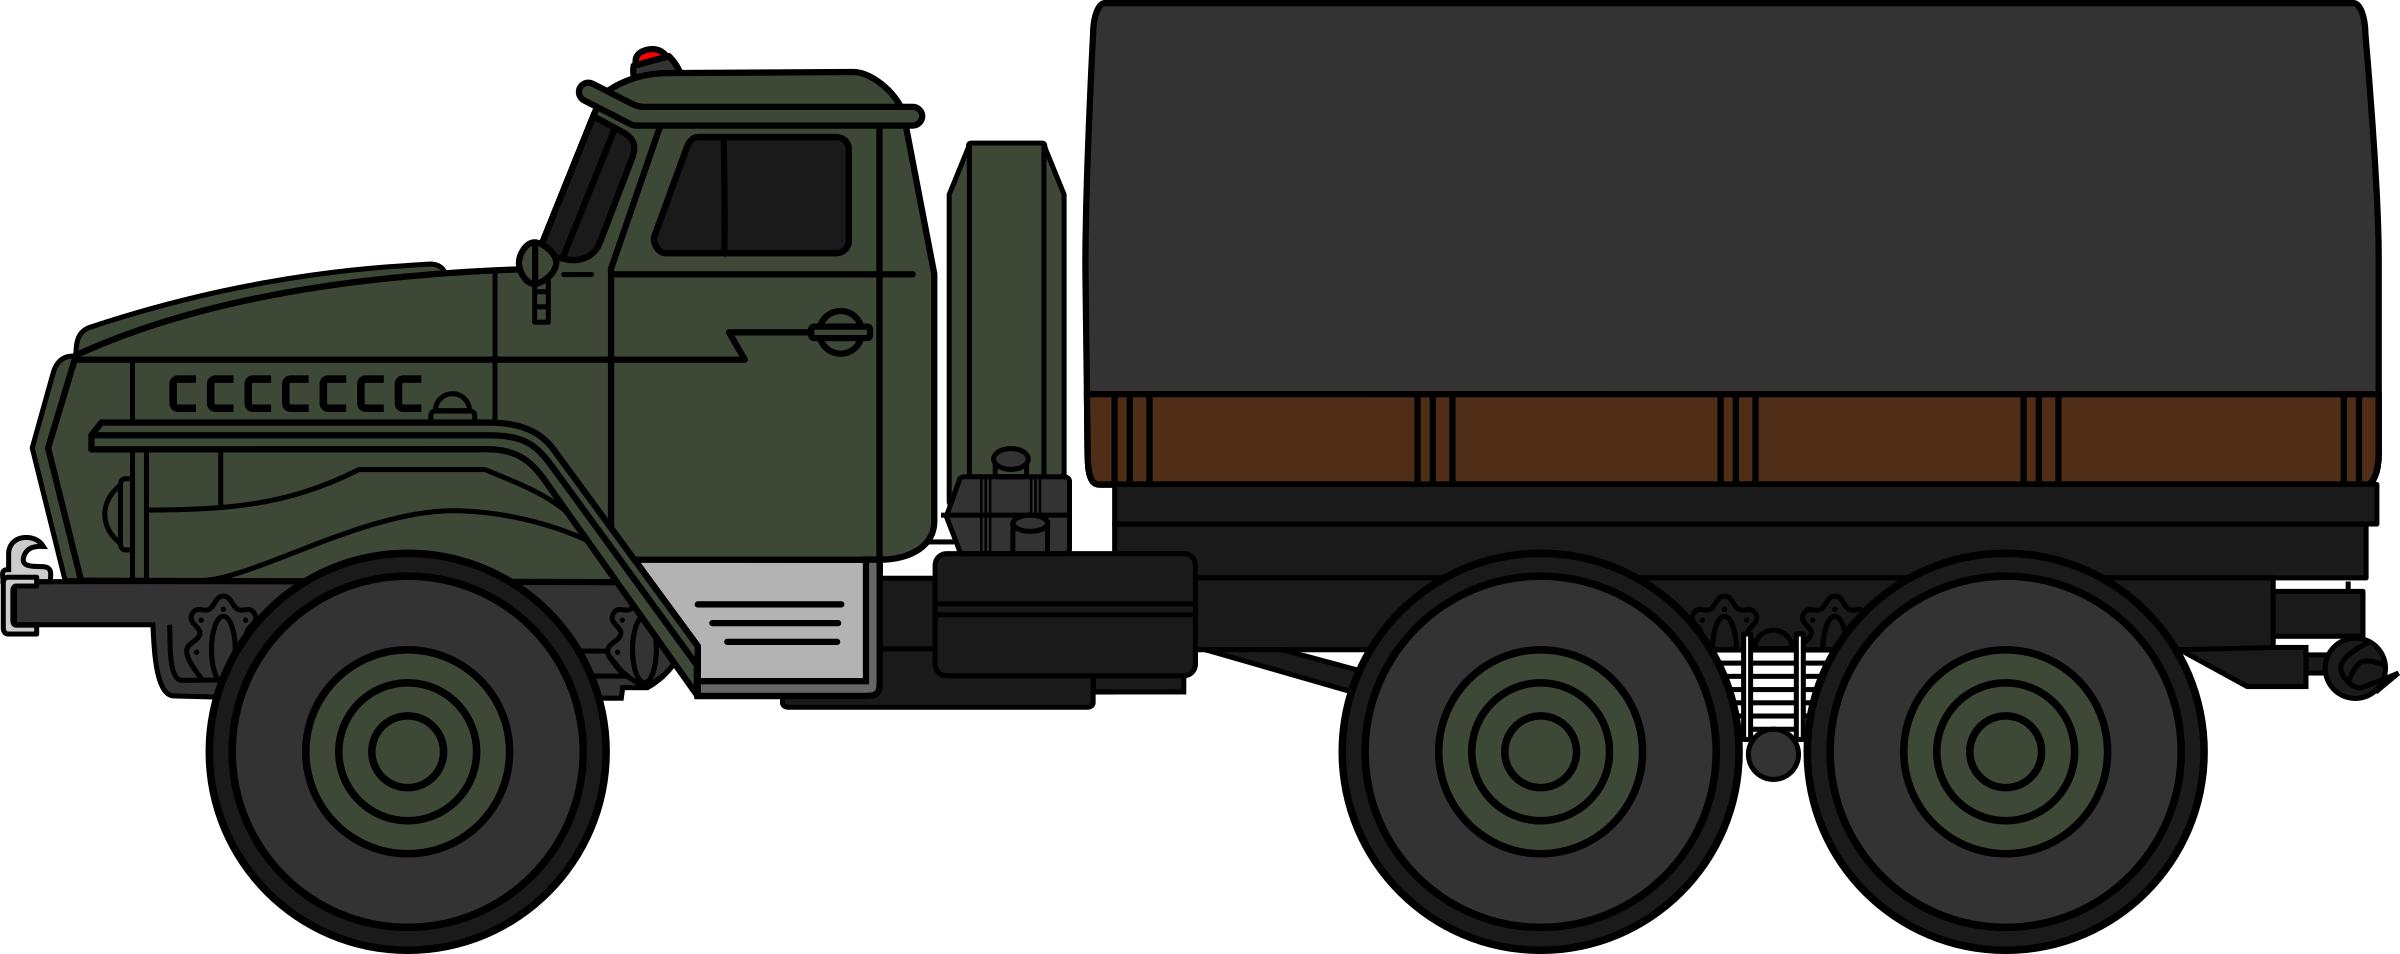 Ural-4320 military truck (coloured) png